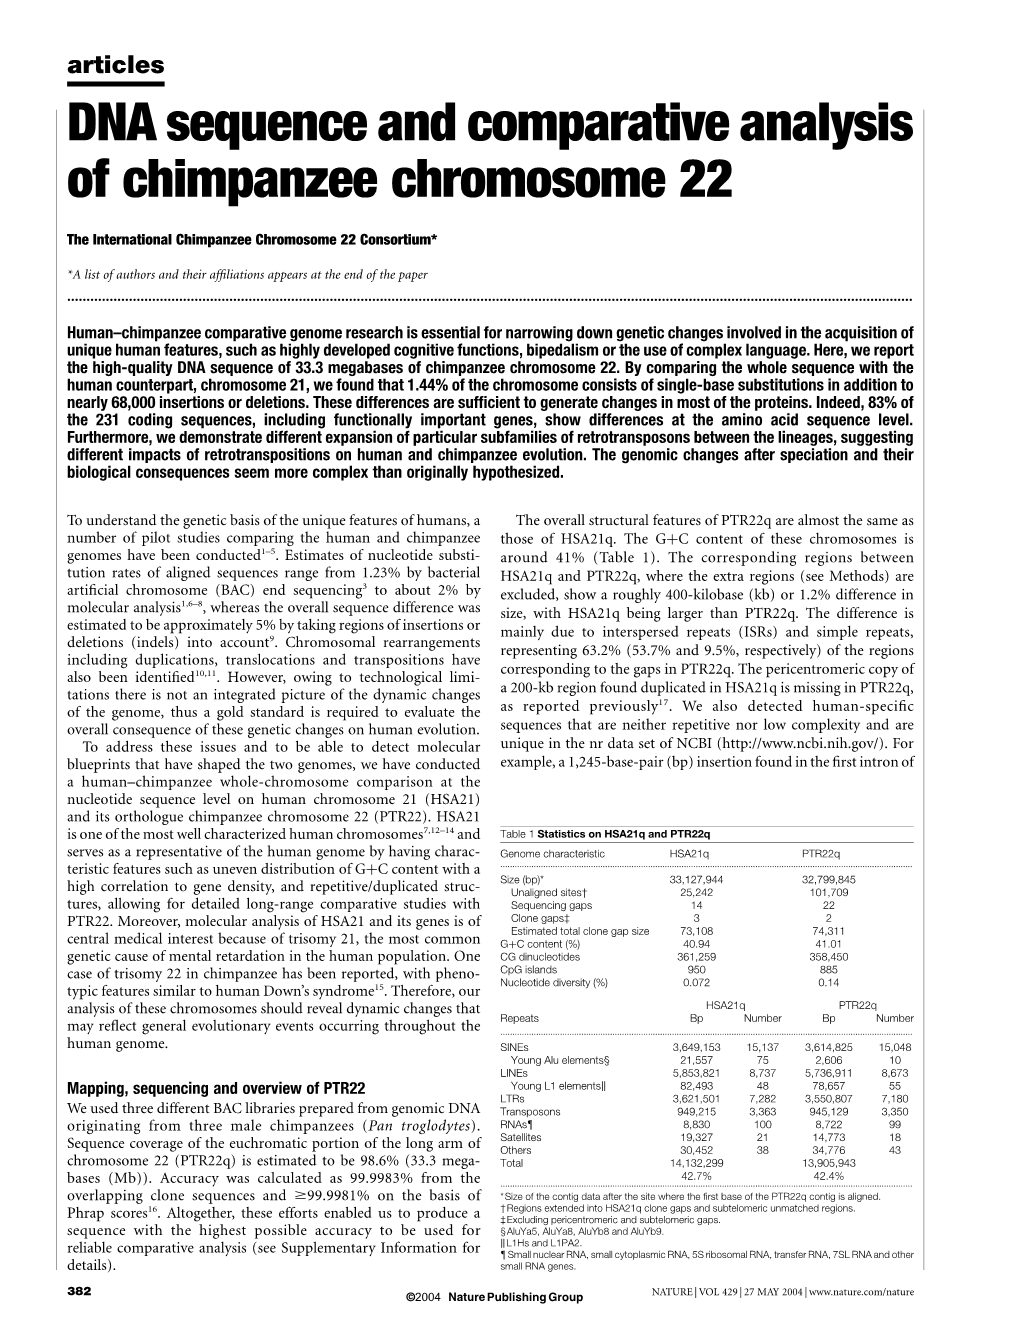 DNA Sequence and Comparative Analysis of Chimpanzee Chromosome 22